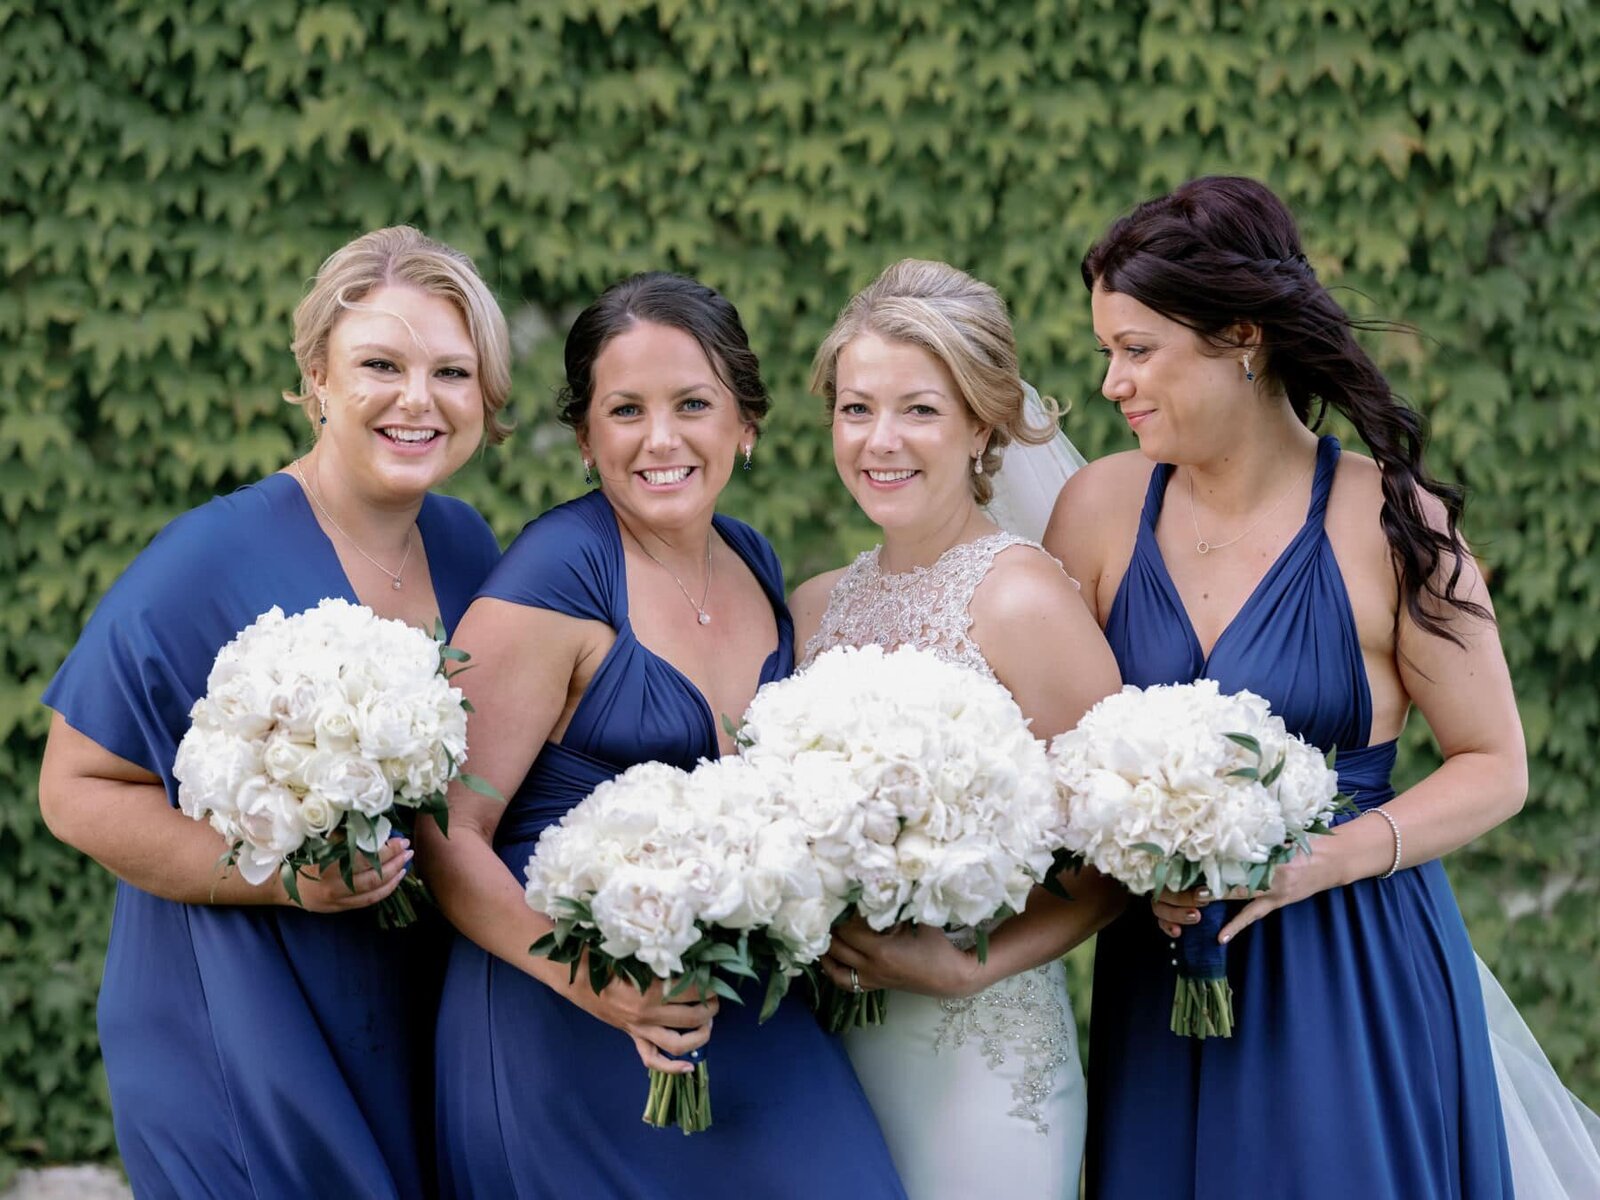 Stones of the Yarra Valley wedding - Serenity Photography 90